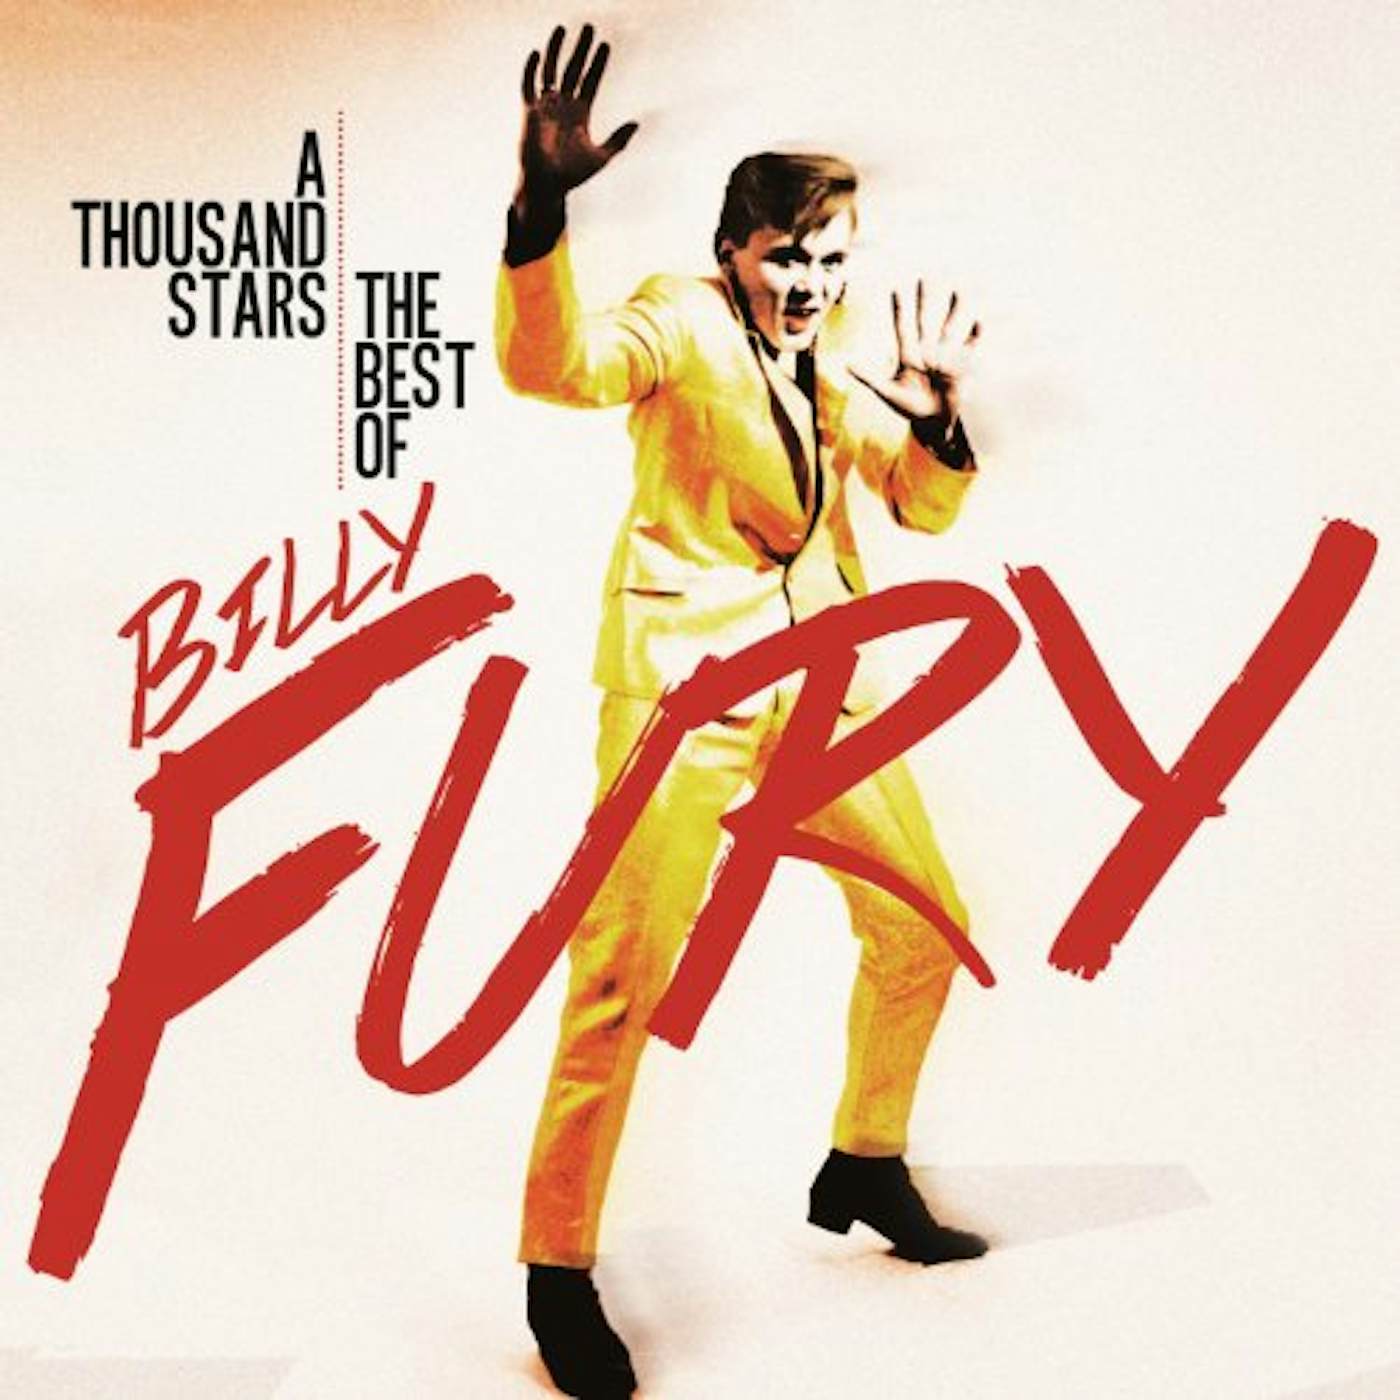 Billy Fury THOUSAND STARS: THE BEST OF CD